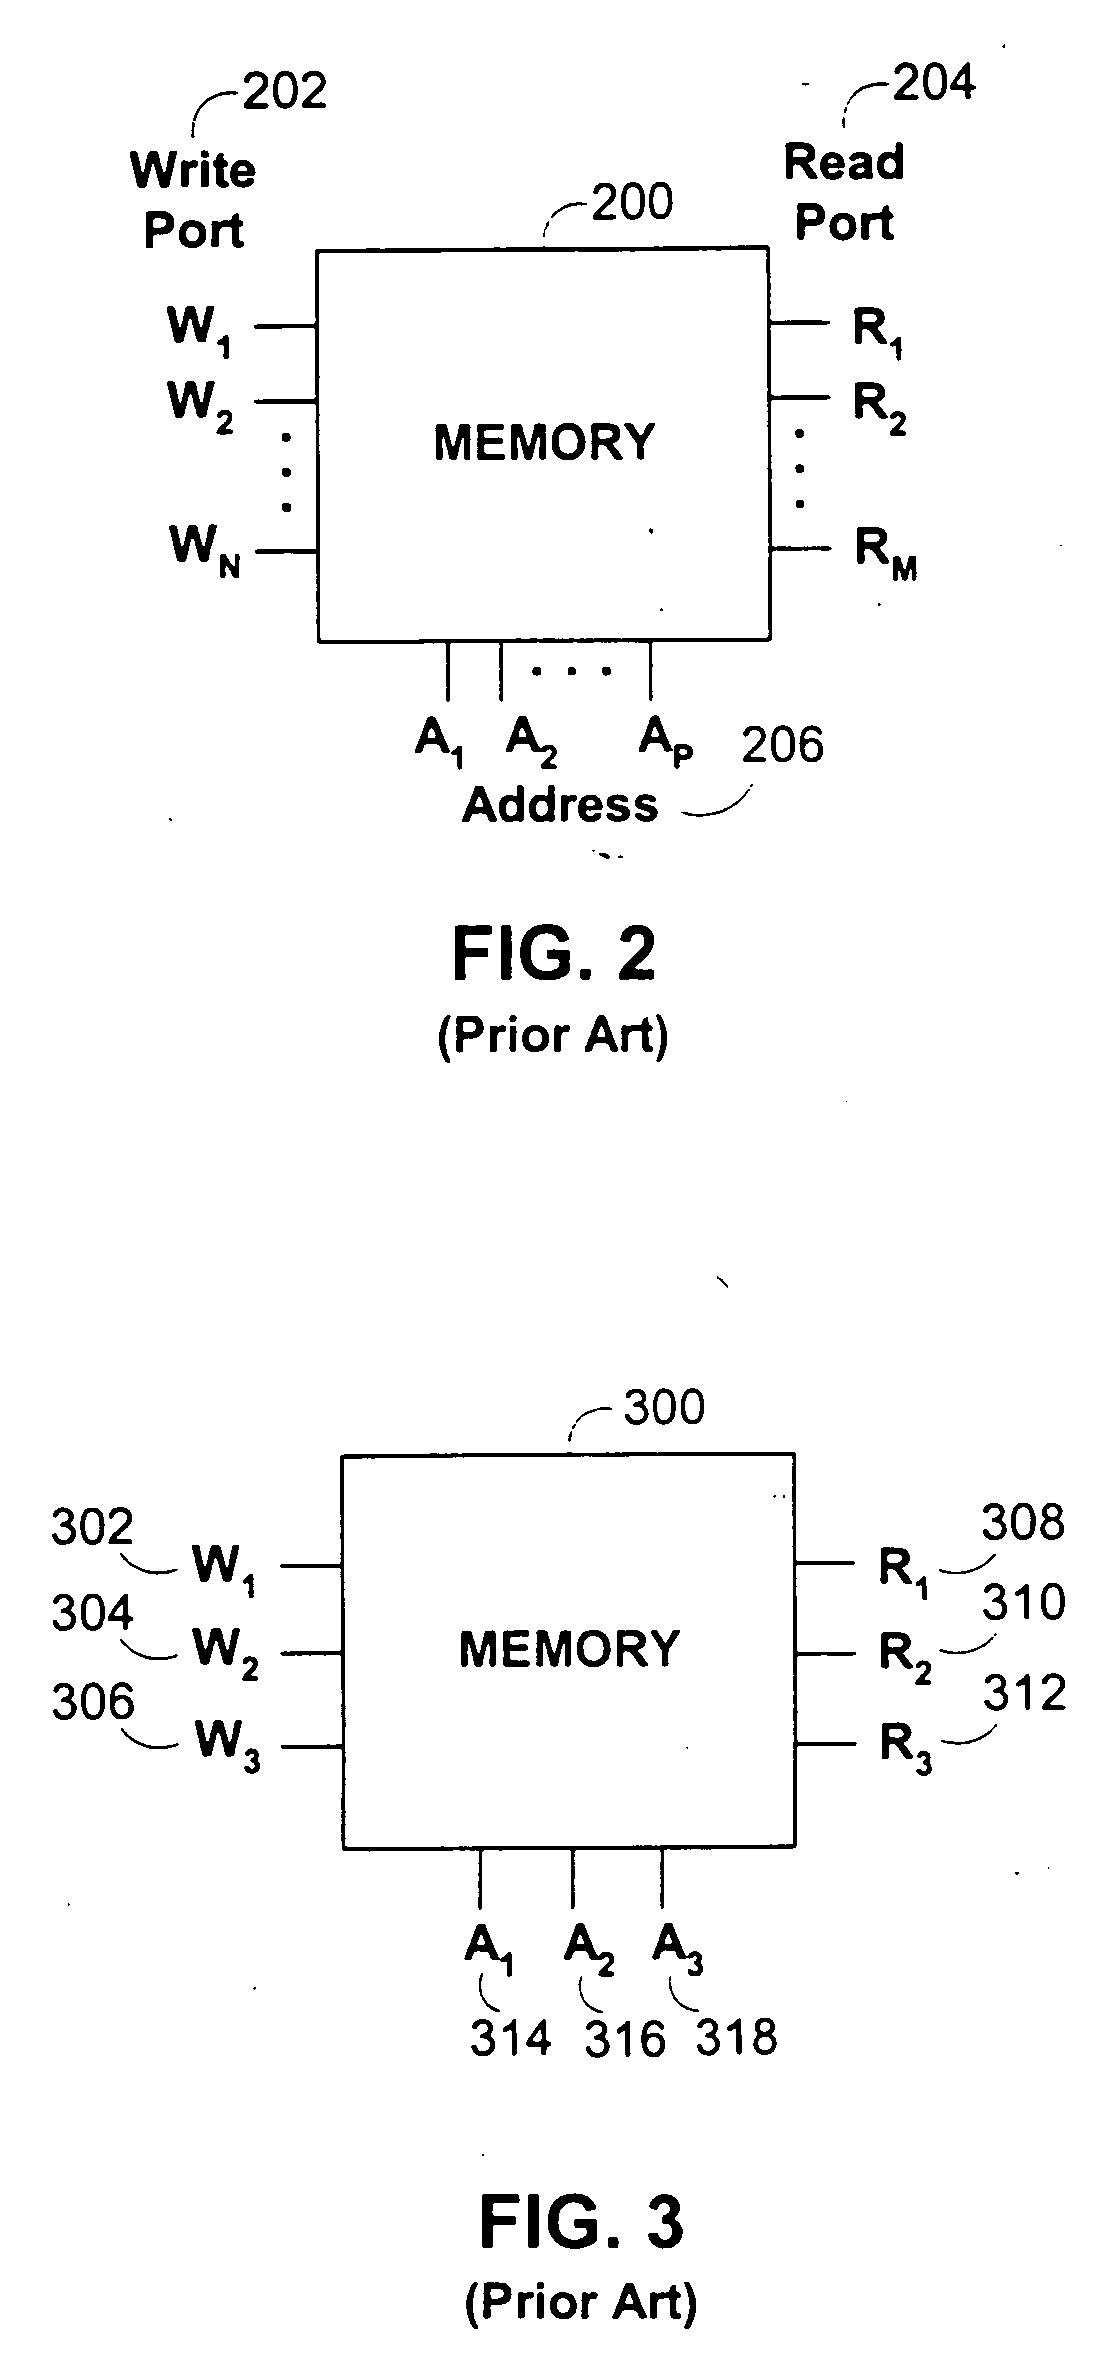 Method for mapping logic design memory into physical memory devices of a programmable logic device